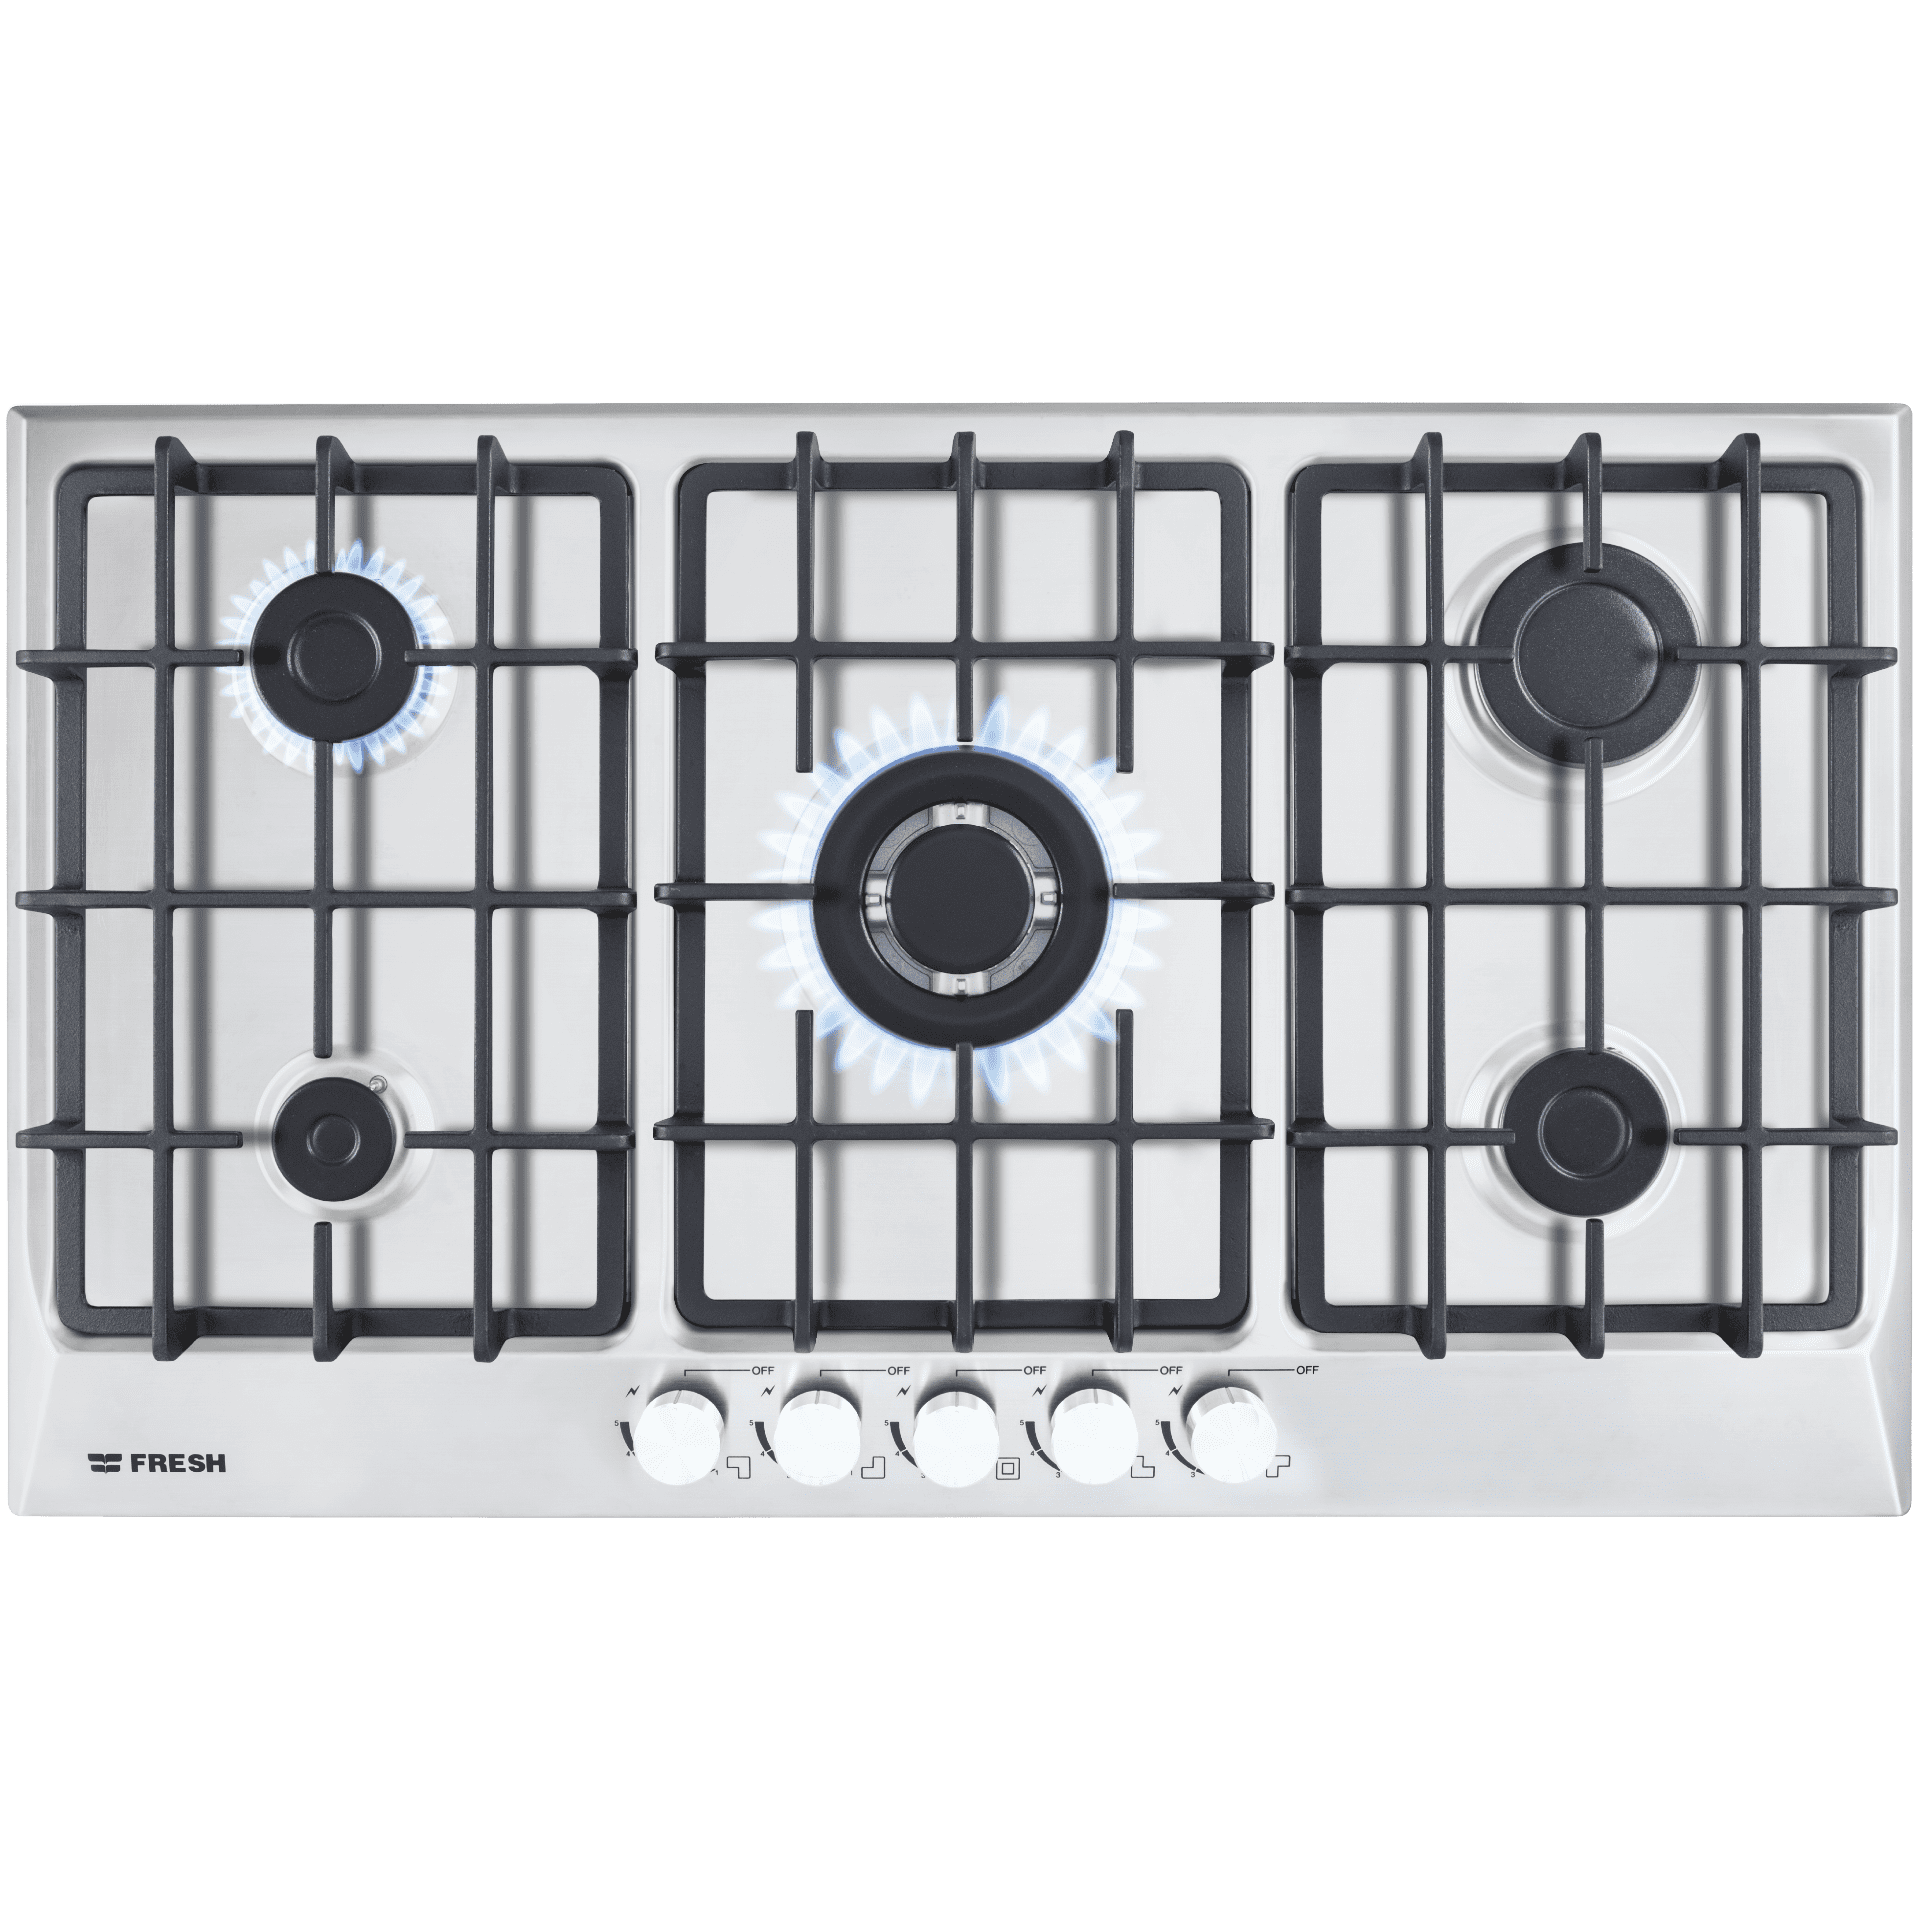 FRESH GAS COOKER BUILT IN STAINLESS 5 BURNERS - 60 x 90 CM - 500008869